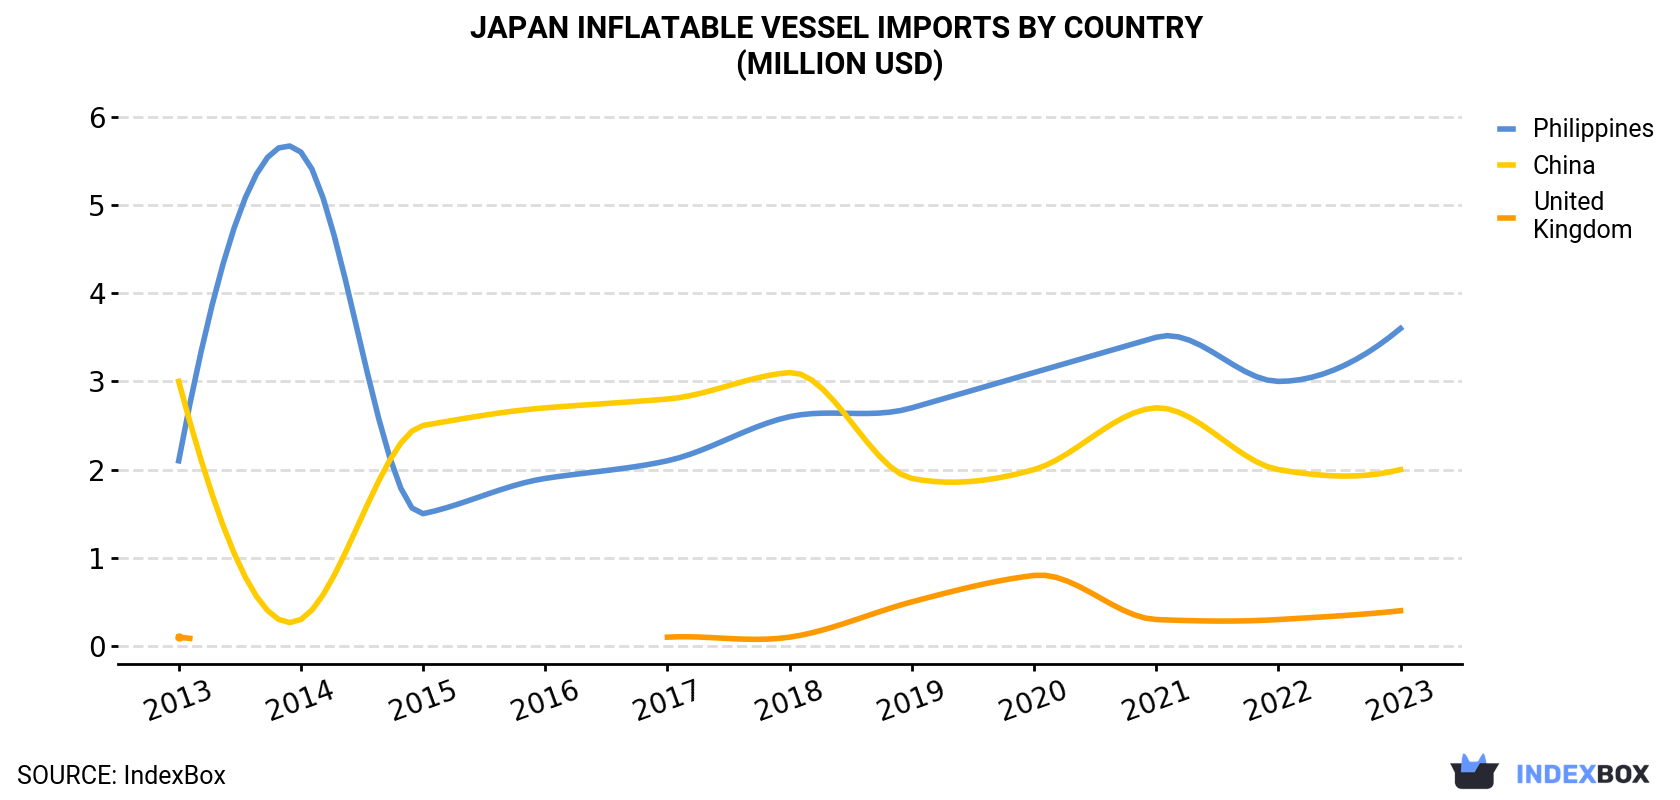 Japan Inflatable Vessel Imports By Country (Million USD)